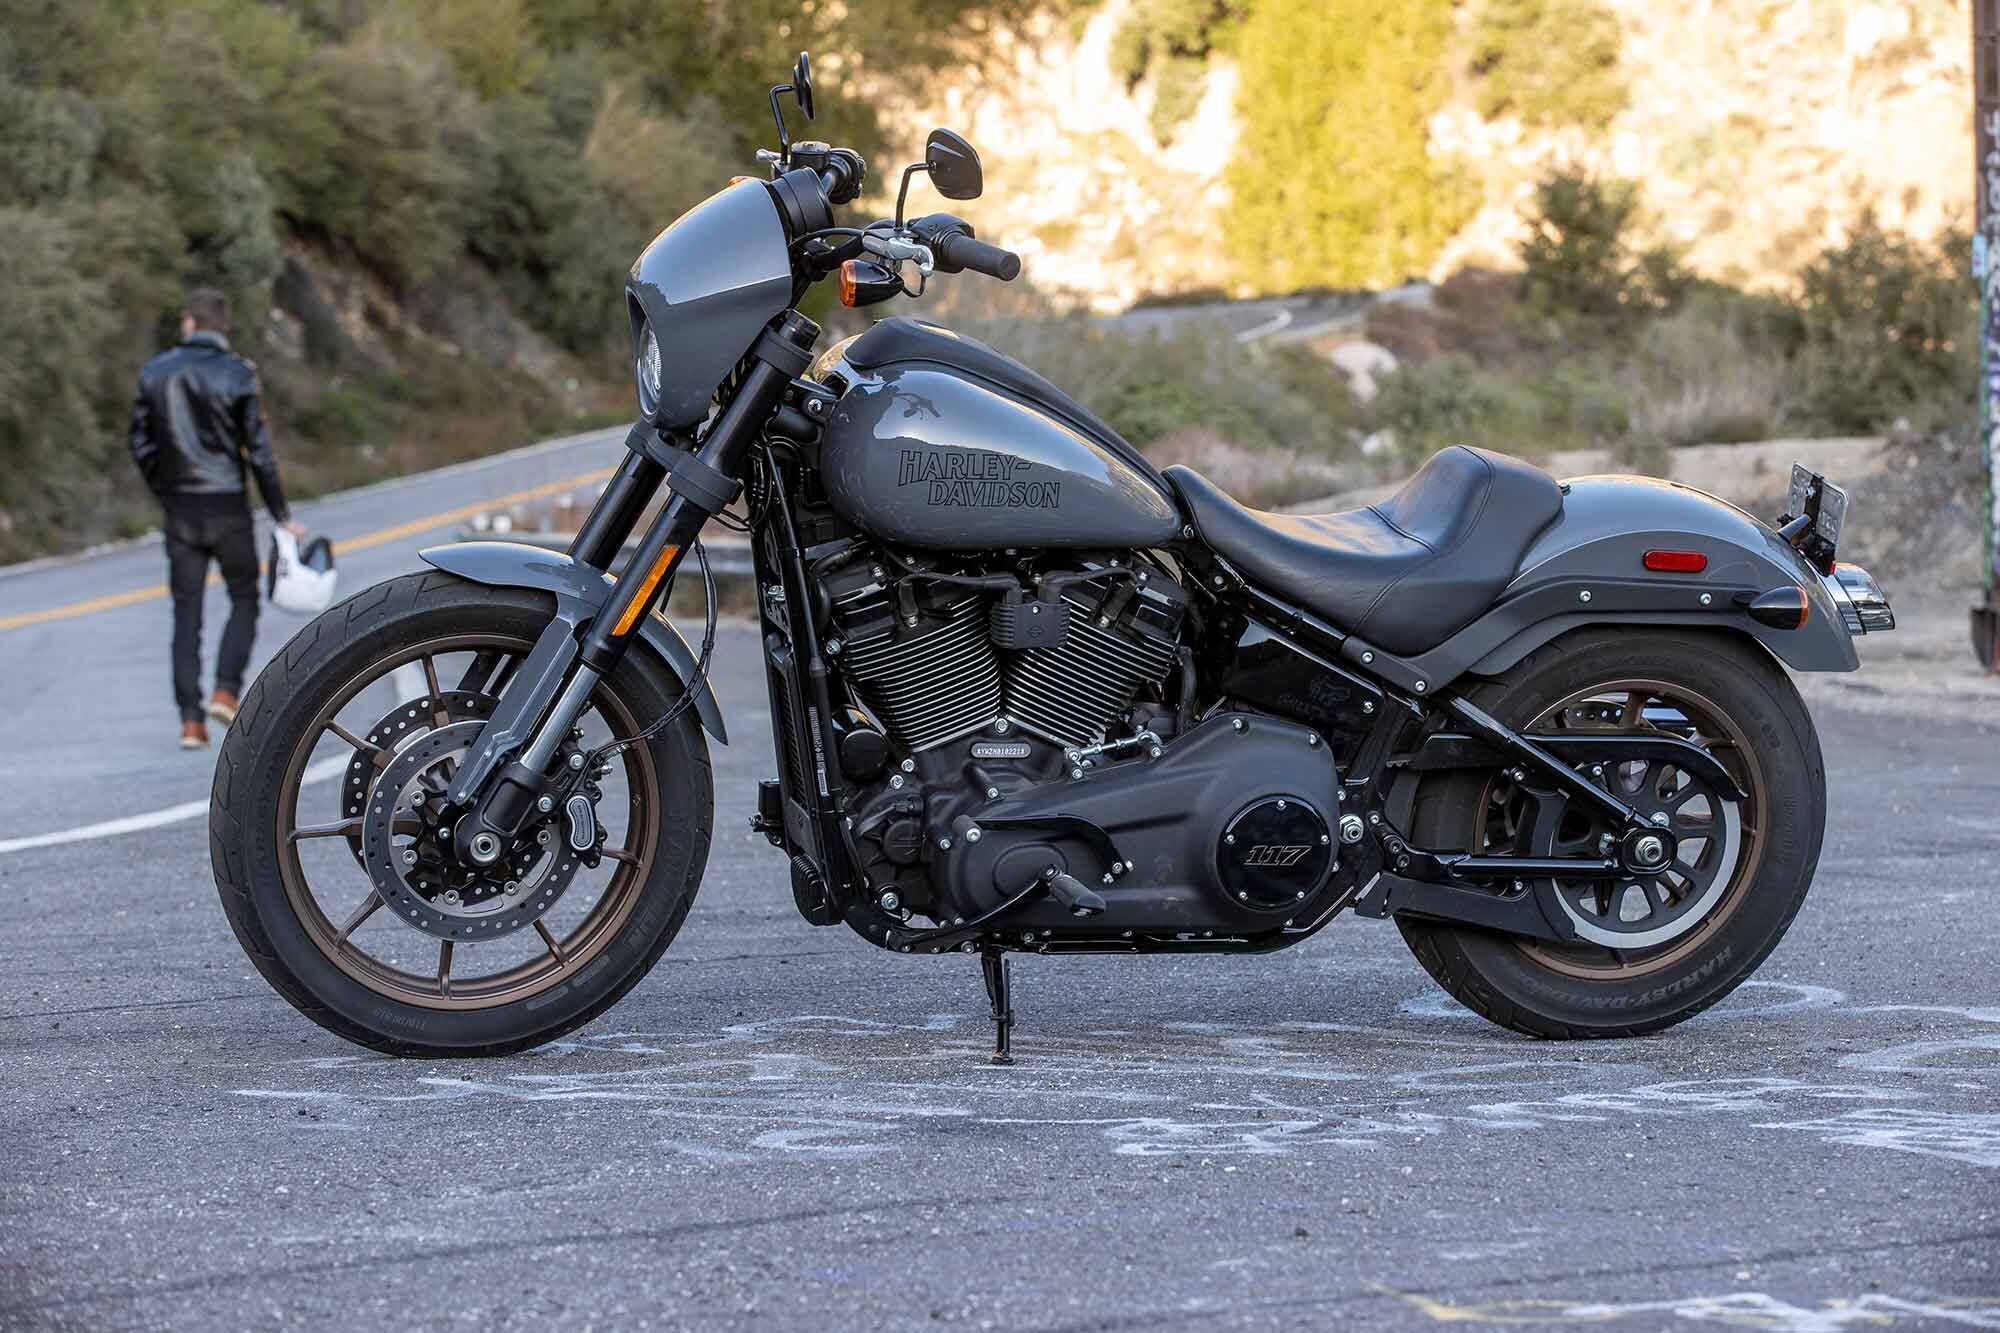 The third version of Harley-Davidson's Low Rider S features the same defining elements you've come to expect from the platform: T-bars, headlamp cover and single seat.